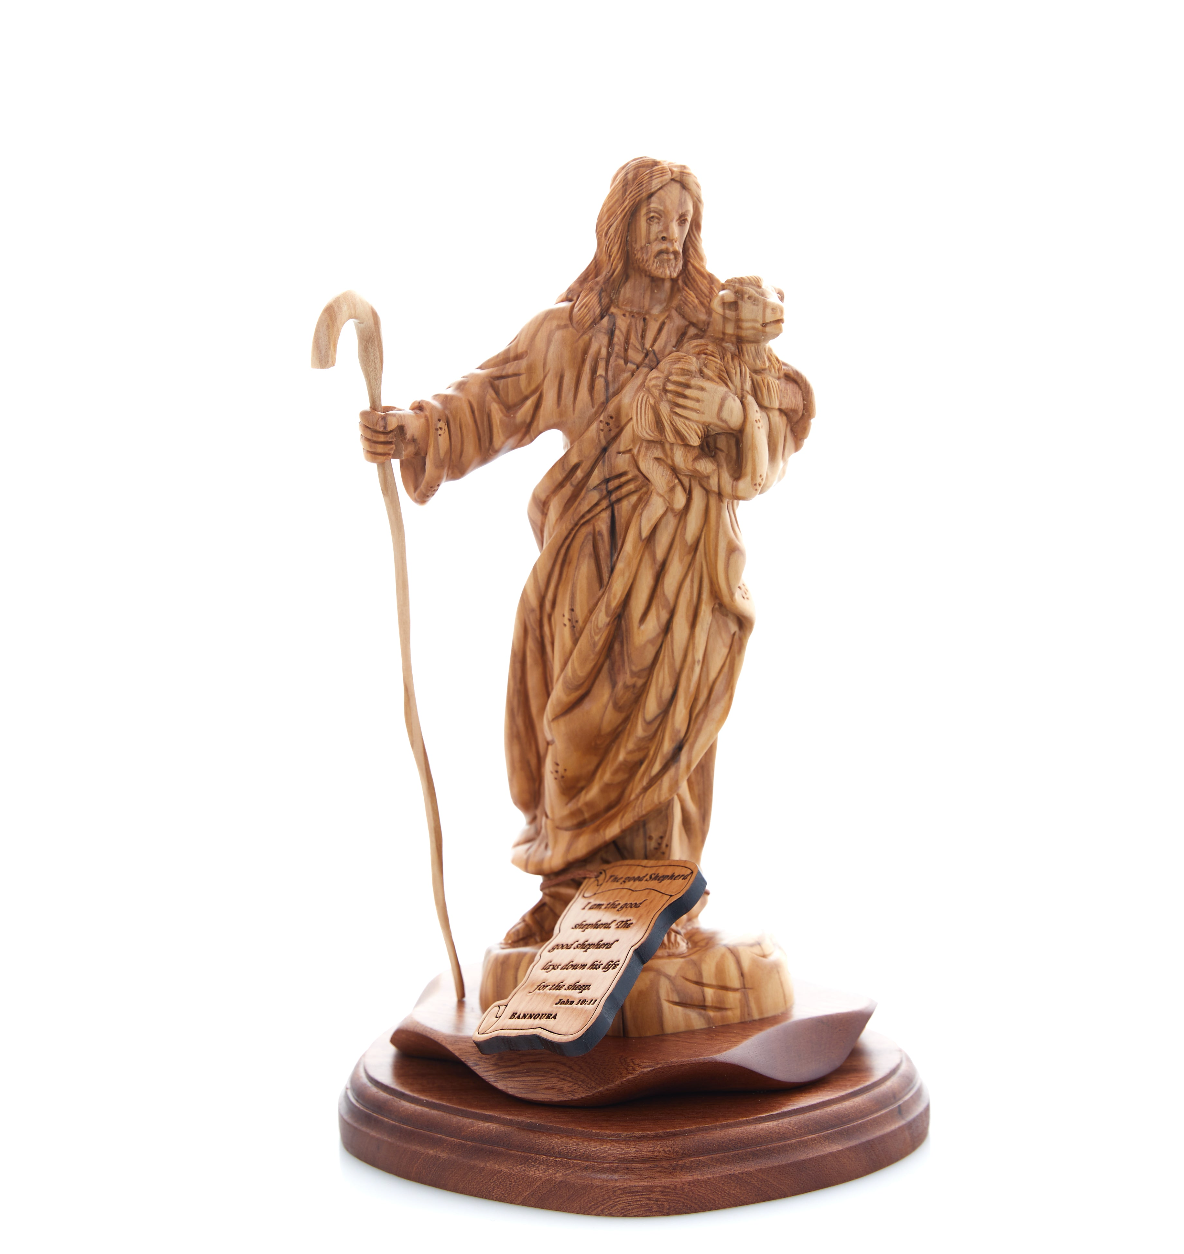 Jesus Christ, "The Good Shepherd" , 10.6" Carved Wooden Statue From the Holy Land